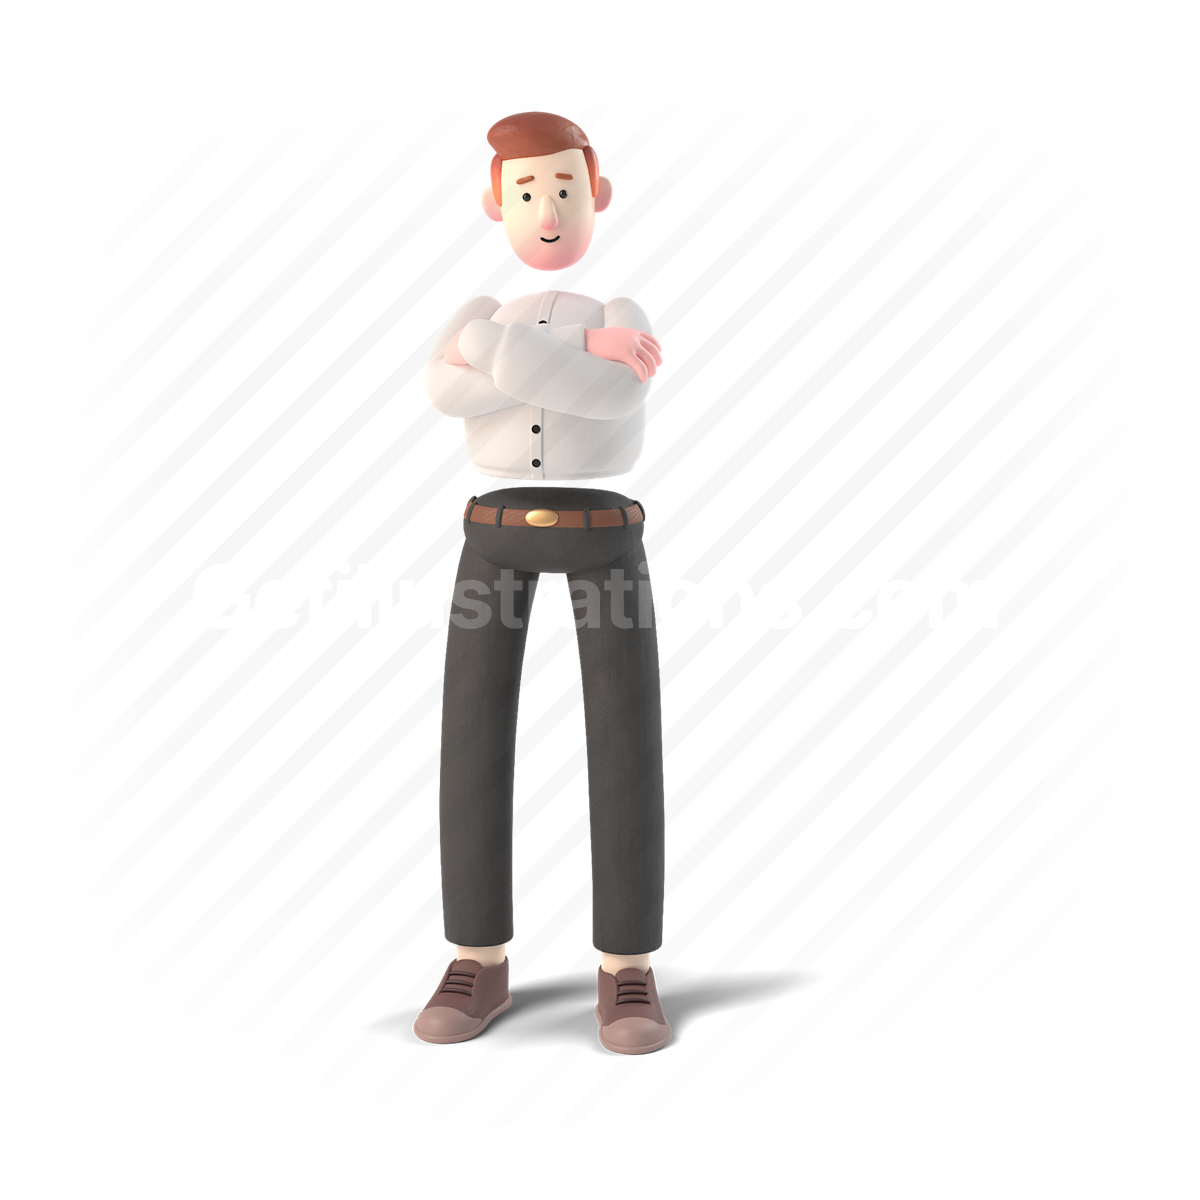 man, uniform, 3d, people, person, character, stand, arms crossed